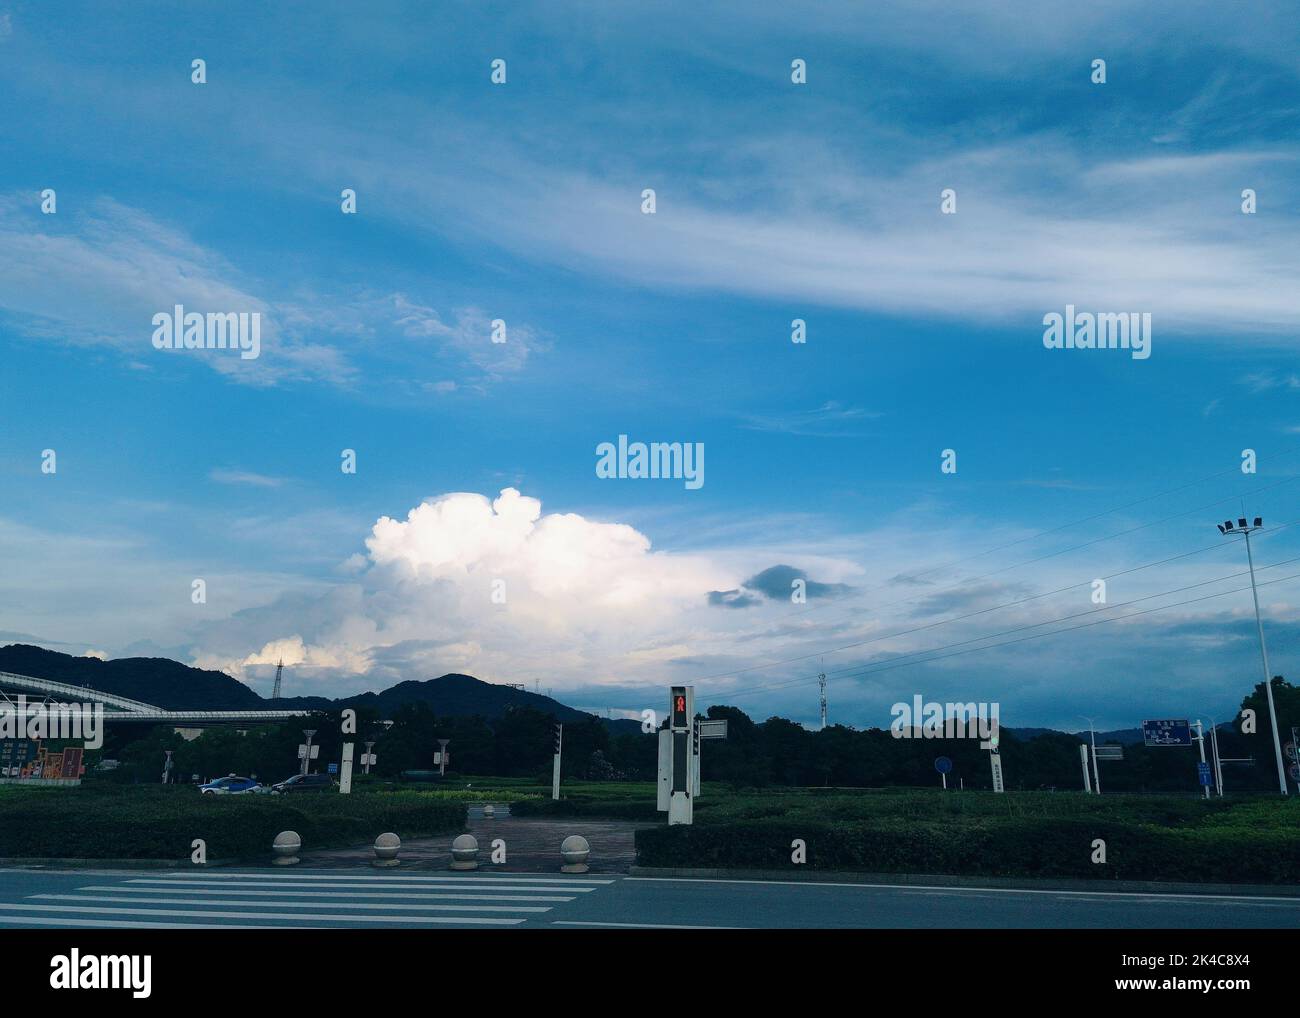 A crosswalk and a street with mesmerizing clouds in sky Stock Photo